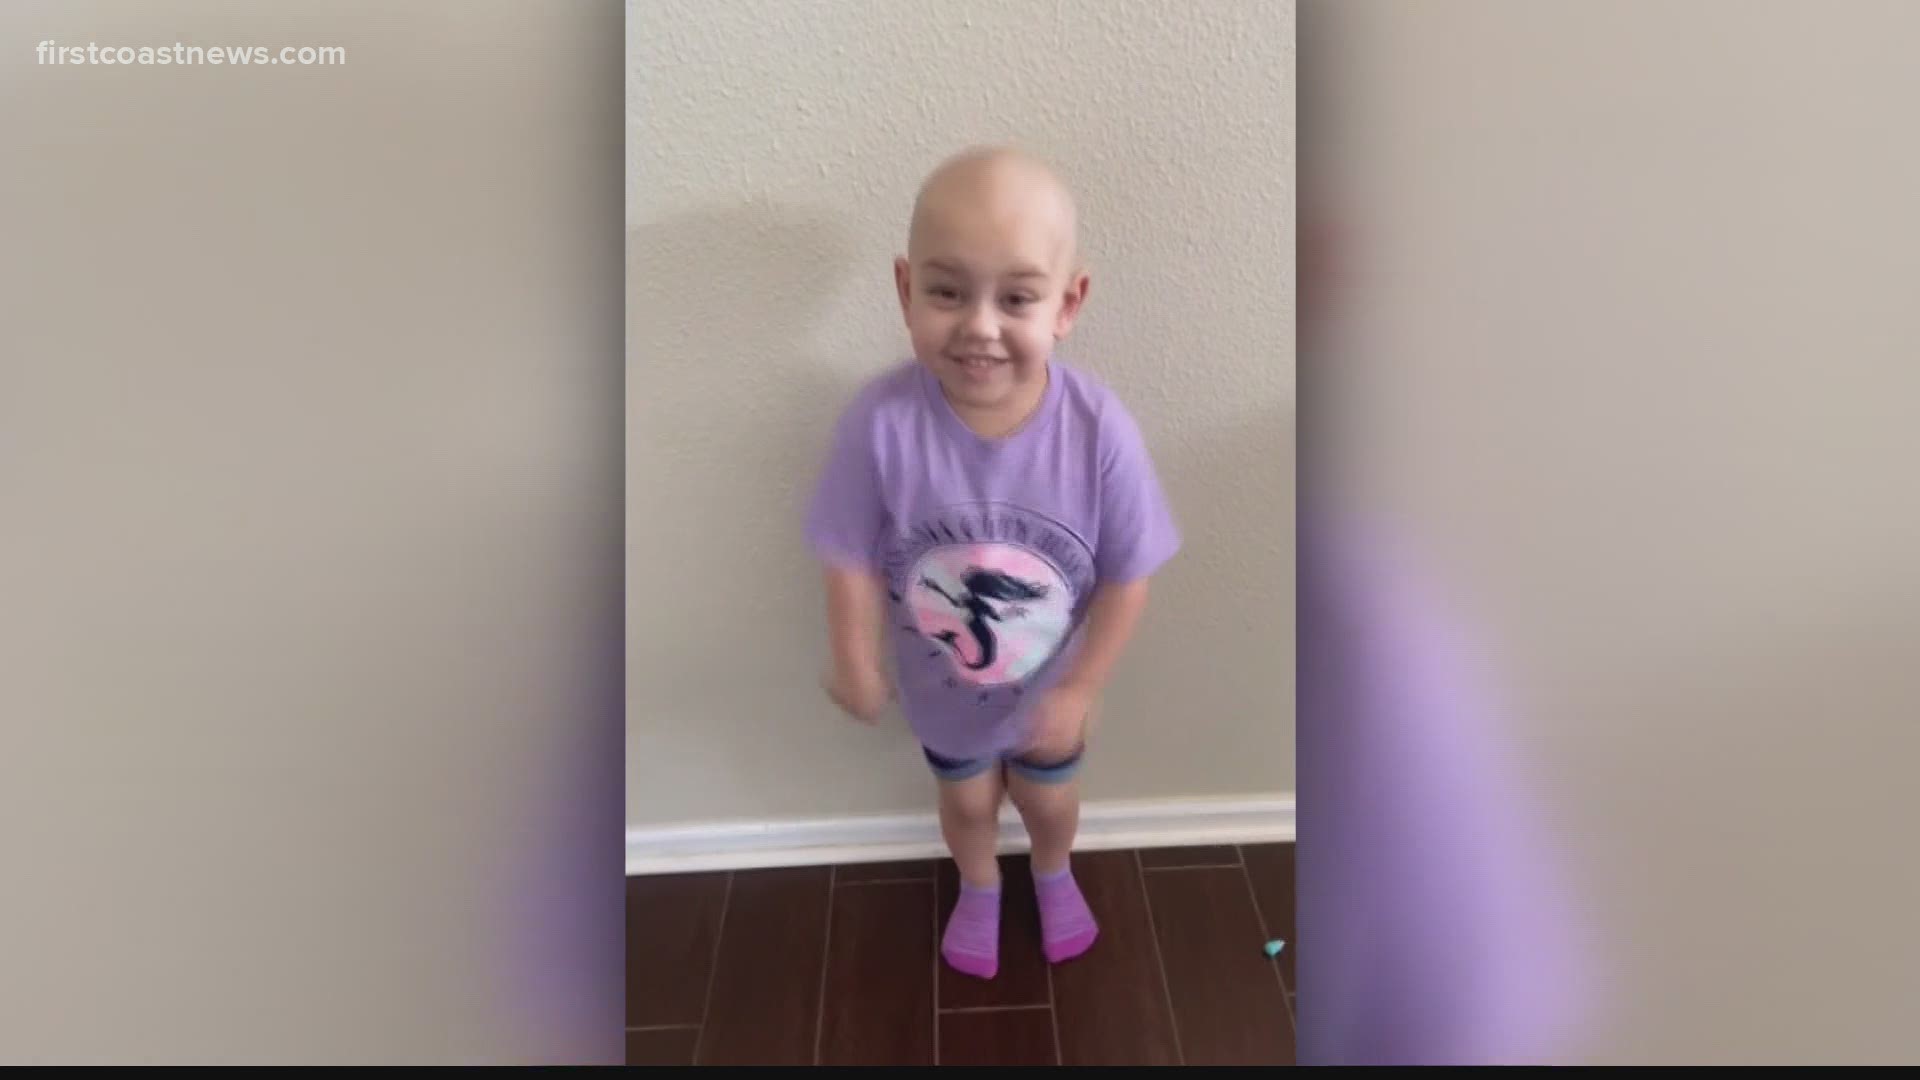 It took eight months for Sloane Stadt and her family to be able to shout for joy as she beat cancer amid the pandemic.